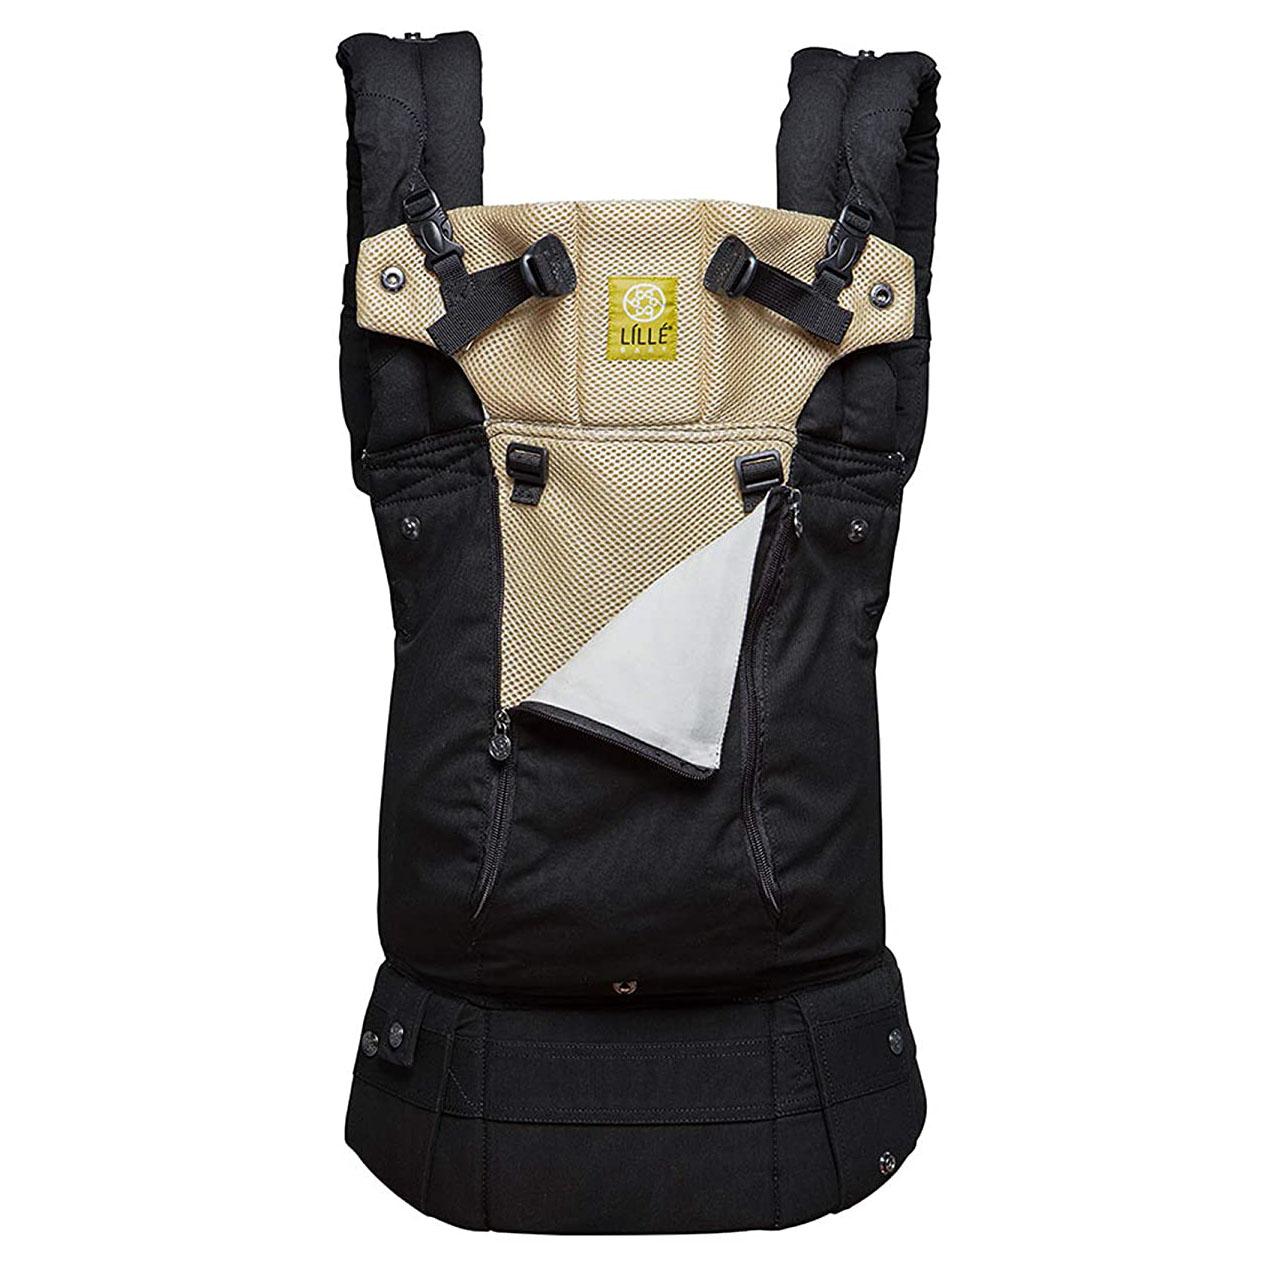 Lillebaby All Seasons 6-Position Ergonomic Baby Carrier for $69.99 Shipped